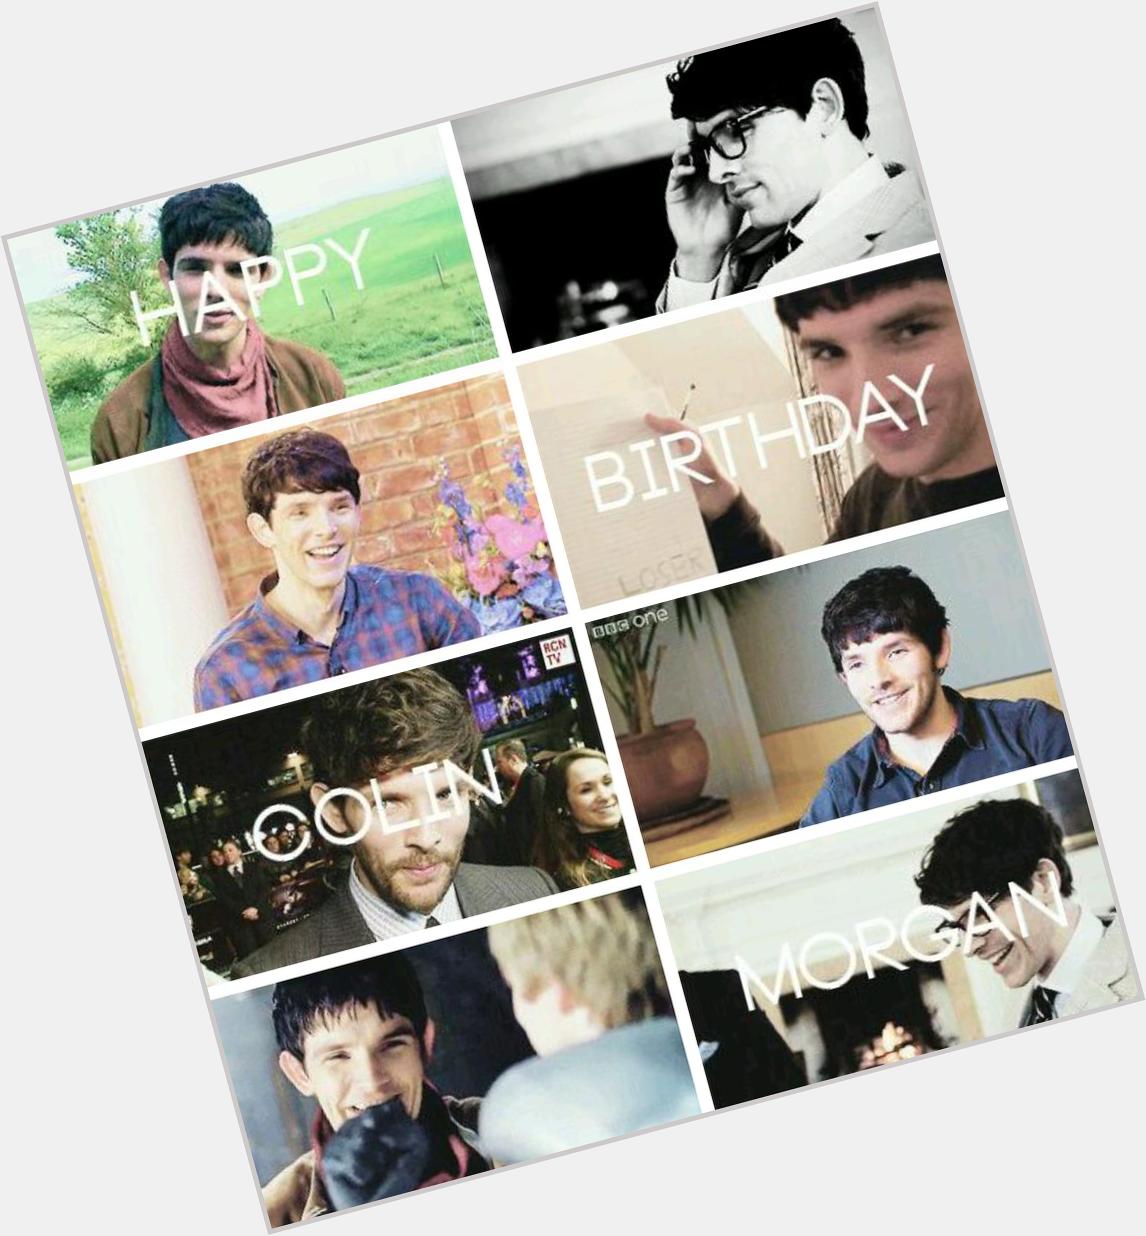 Happy birthday to Colin Morgan   the best ever! 